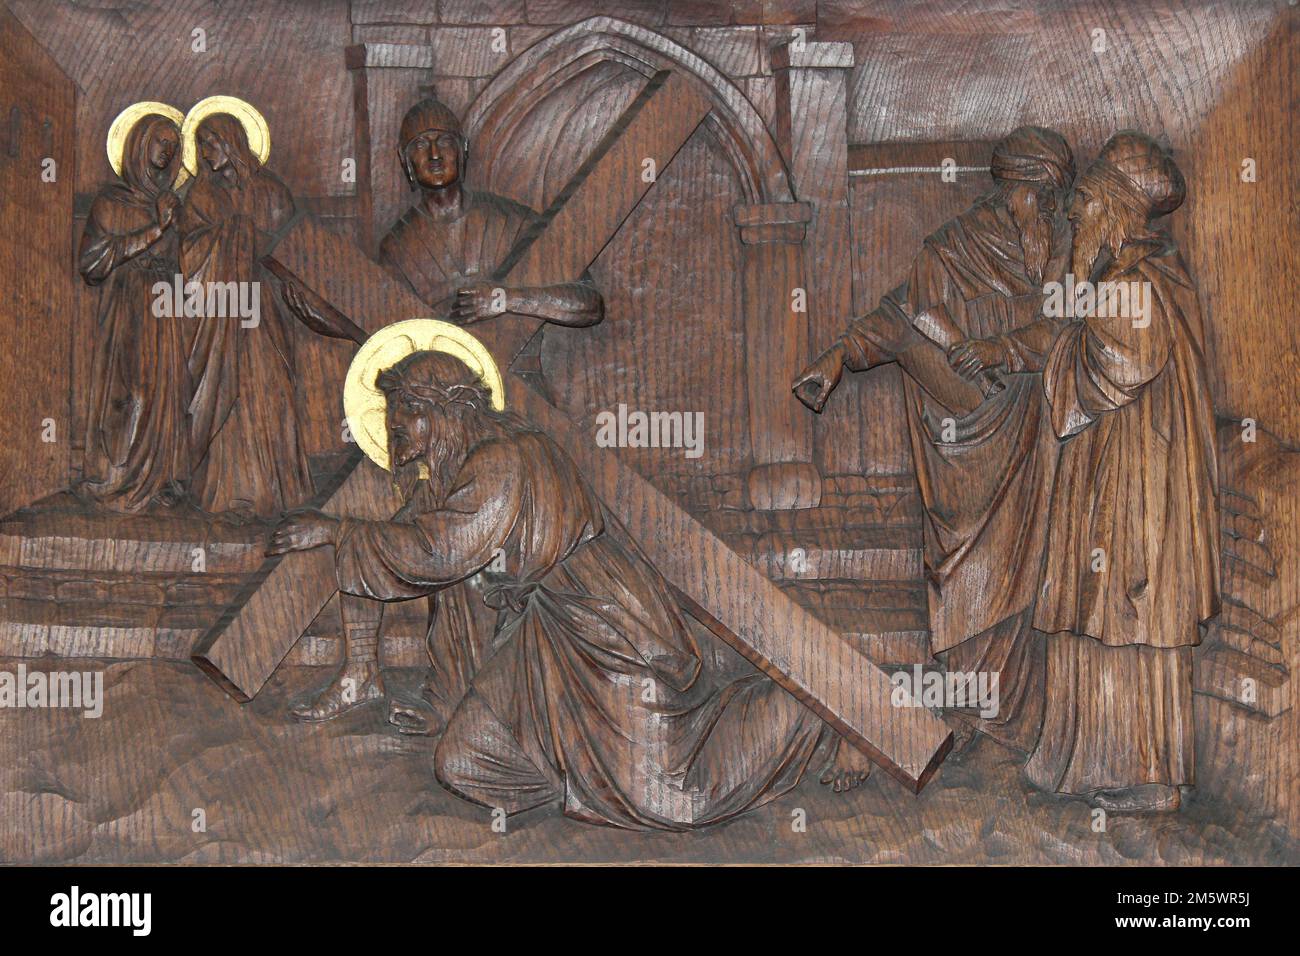 Stations Of The Cross Jesus Falls For the Second Time Stock Photo